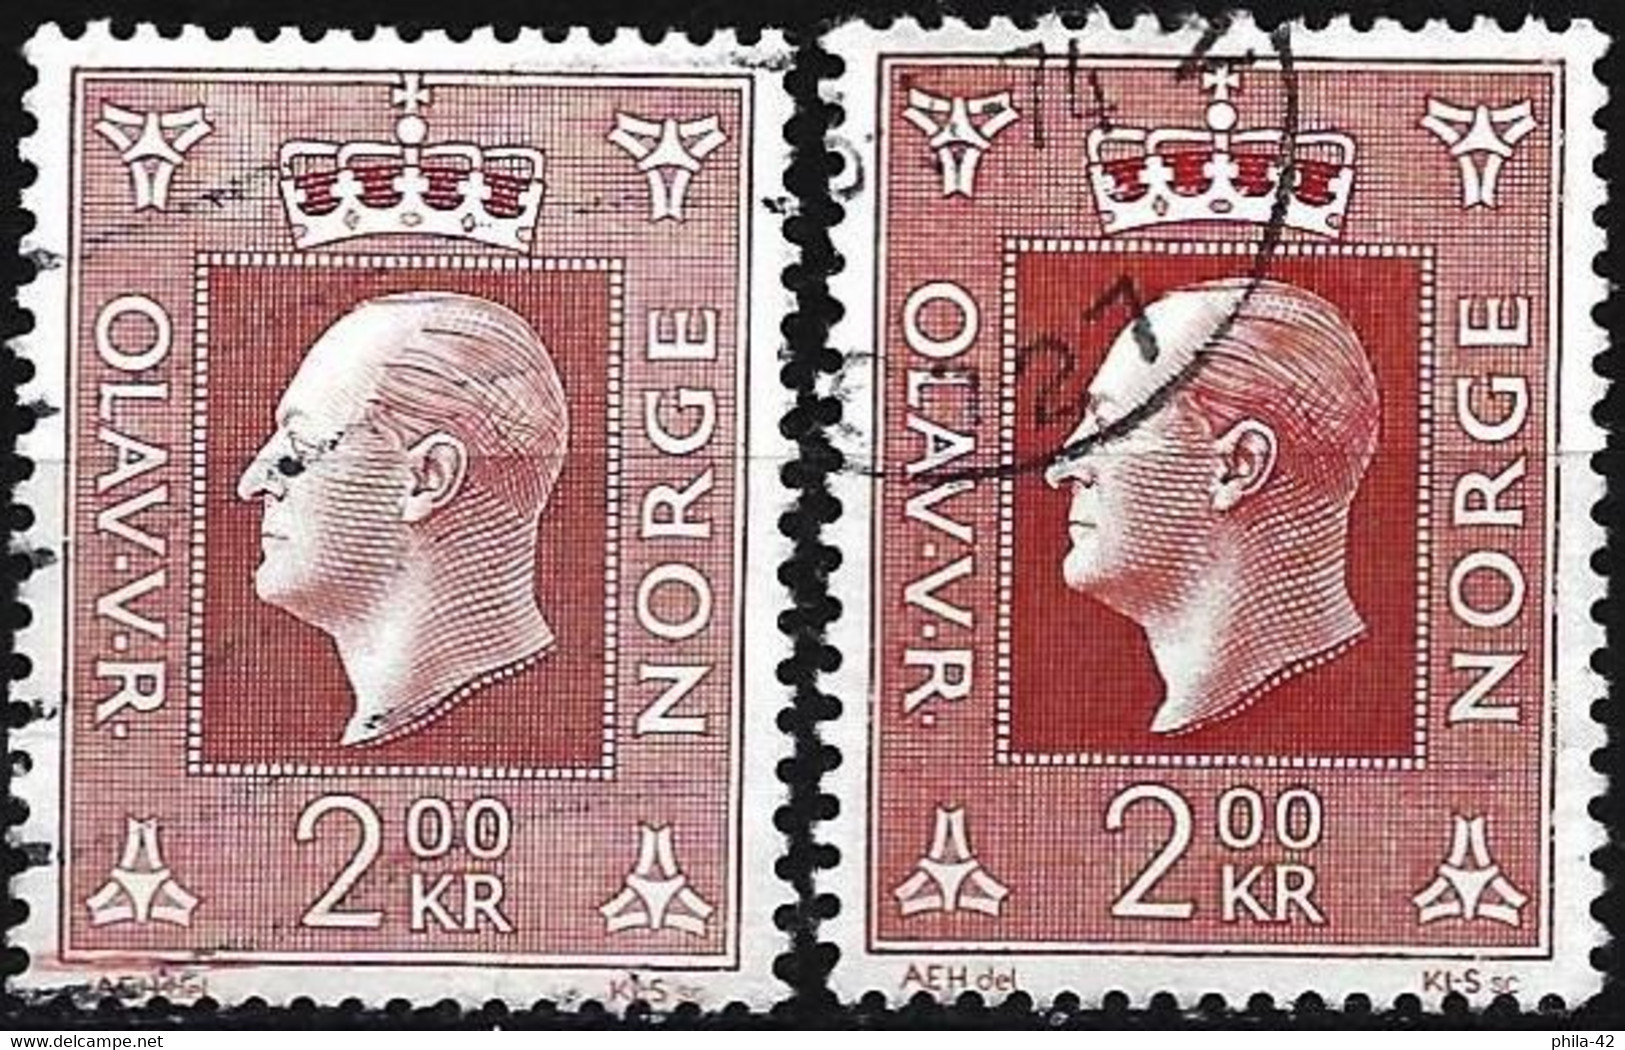 Norway 1970 - Mi 590 - YT 547 ( King Olov V ) Two Shades Of Color - Errors, Freaks & Oddities (EFO)